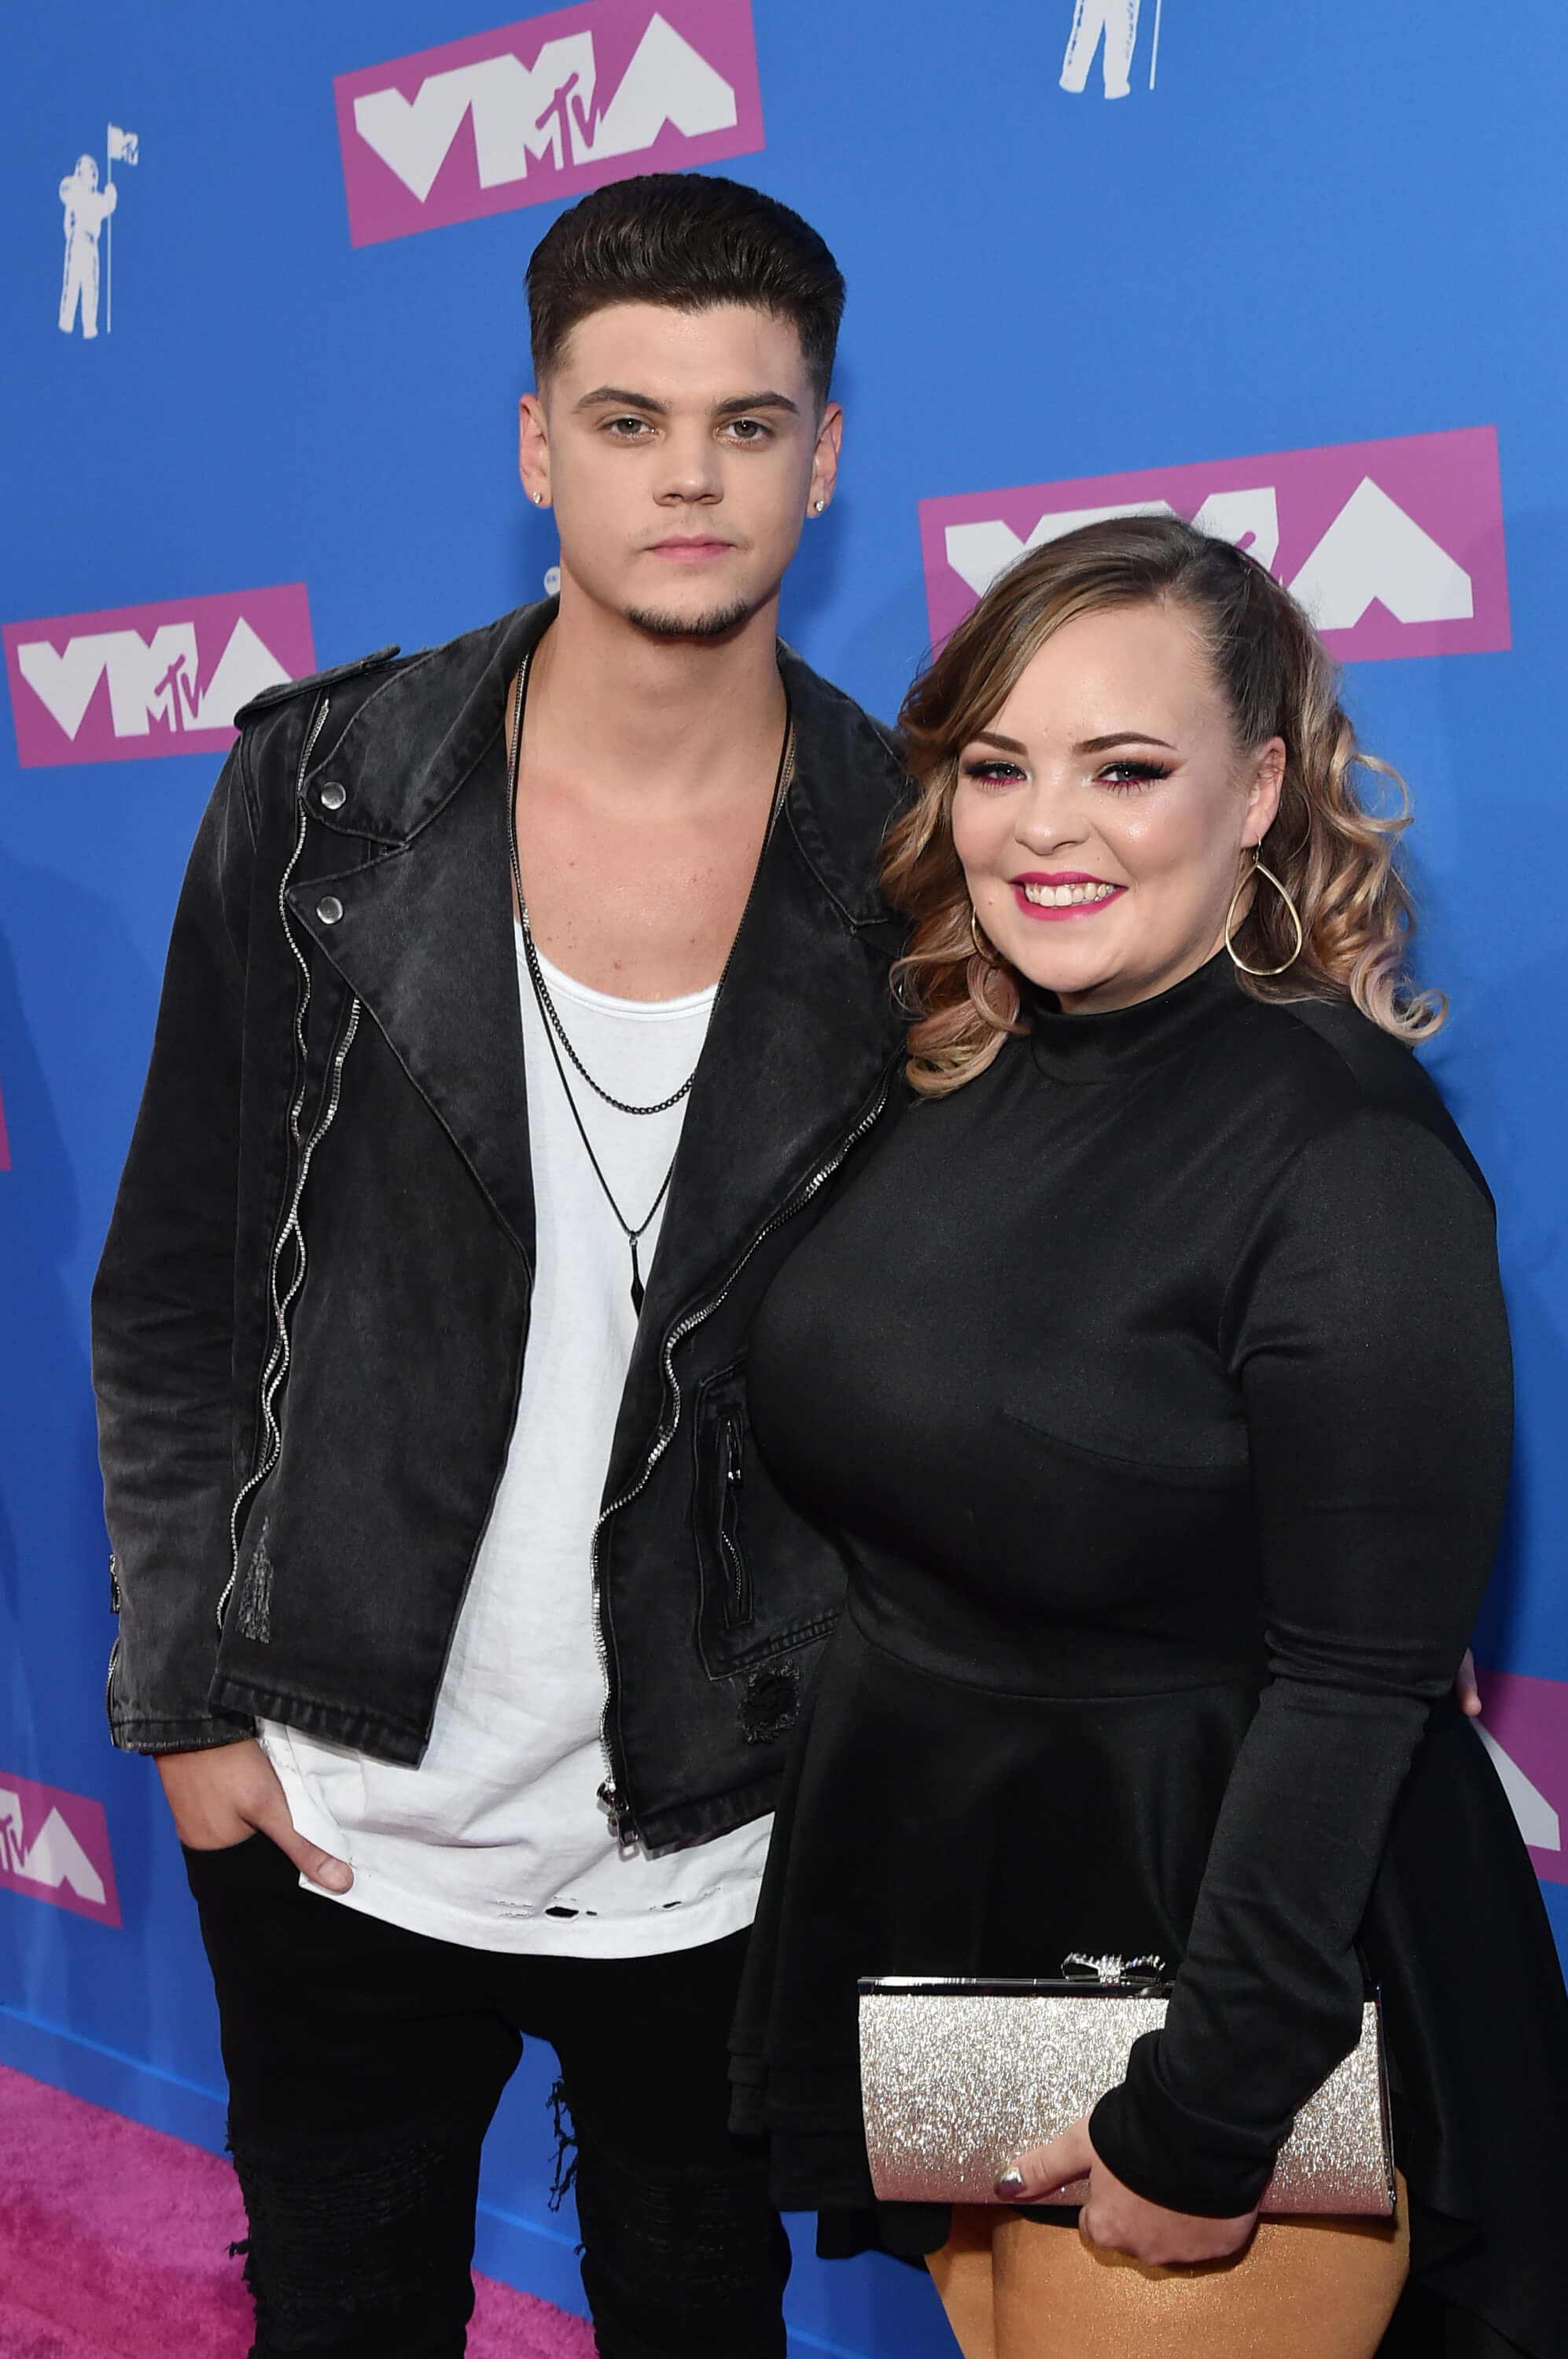 'Teen Mom' stars Tyler Baltierra and Catelynn Lowell standing next to each other and posing at the MTV VMAs